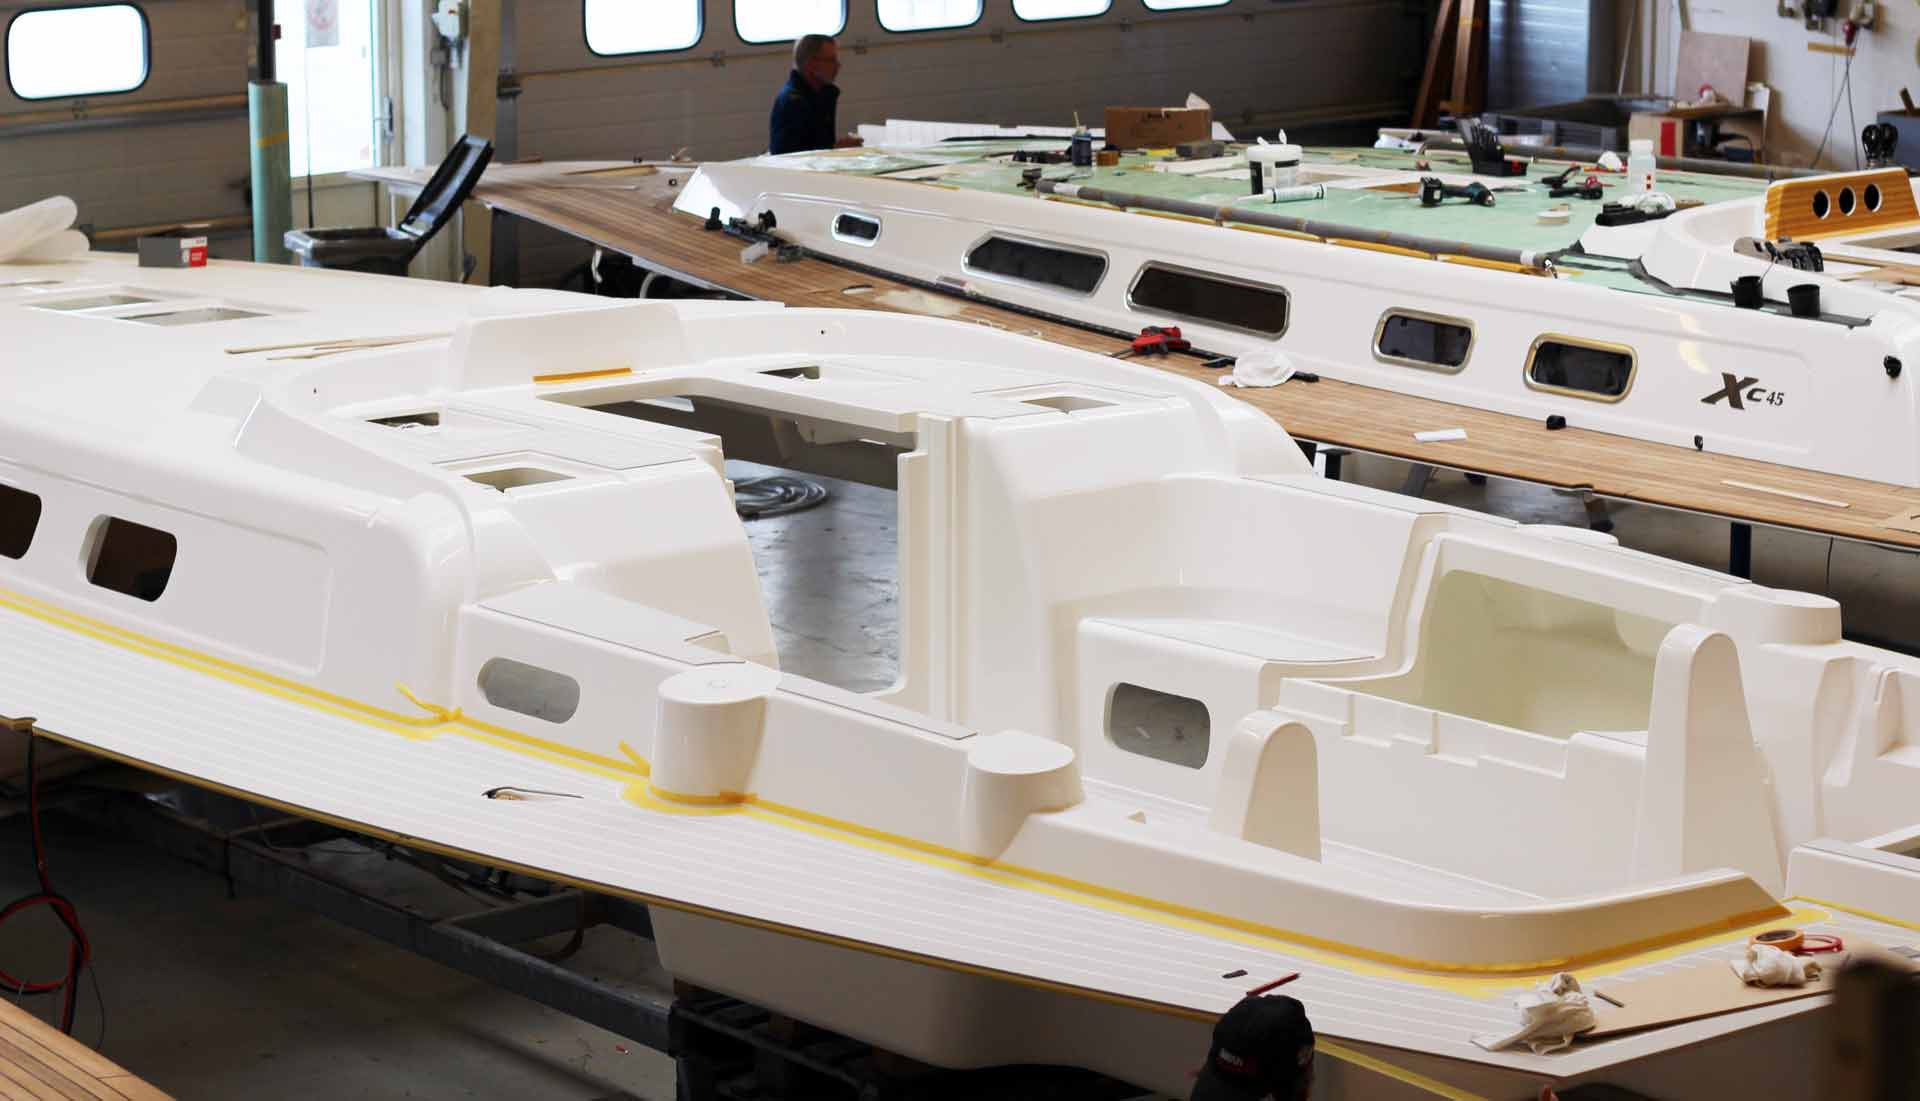 Two Xc45 upper shells awaiting marriage with the hull